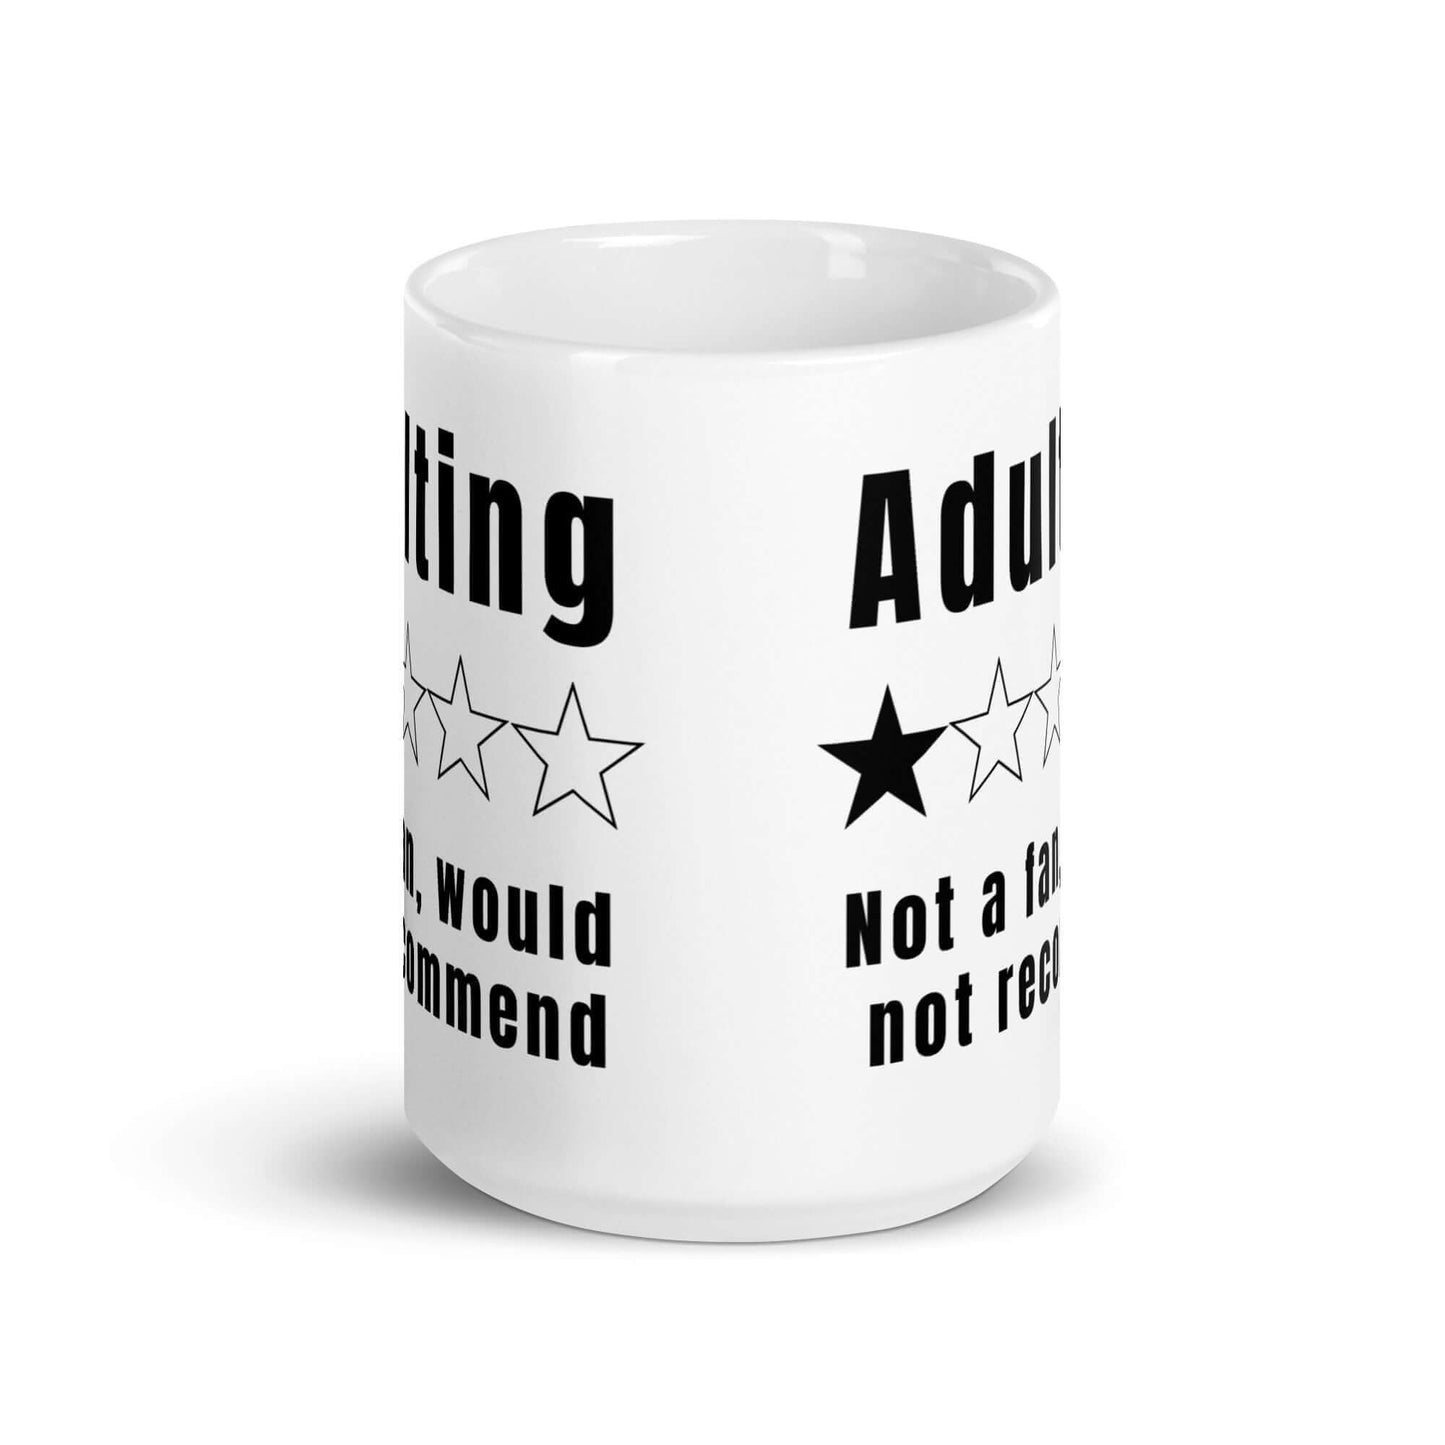 Adulting - Not a fan would not recommend - White glossy mug adult adult mug adulting coffee mug funny mug grown up not a fan